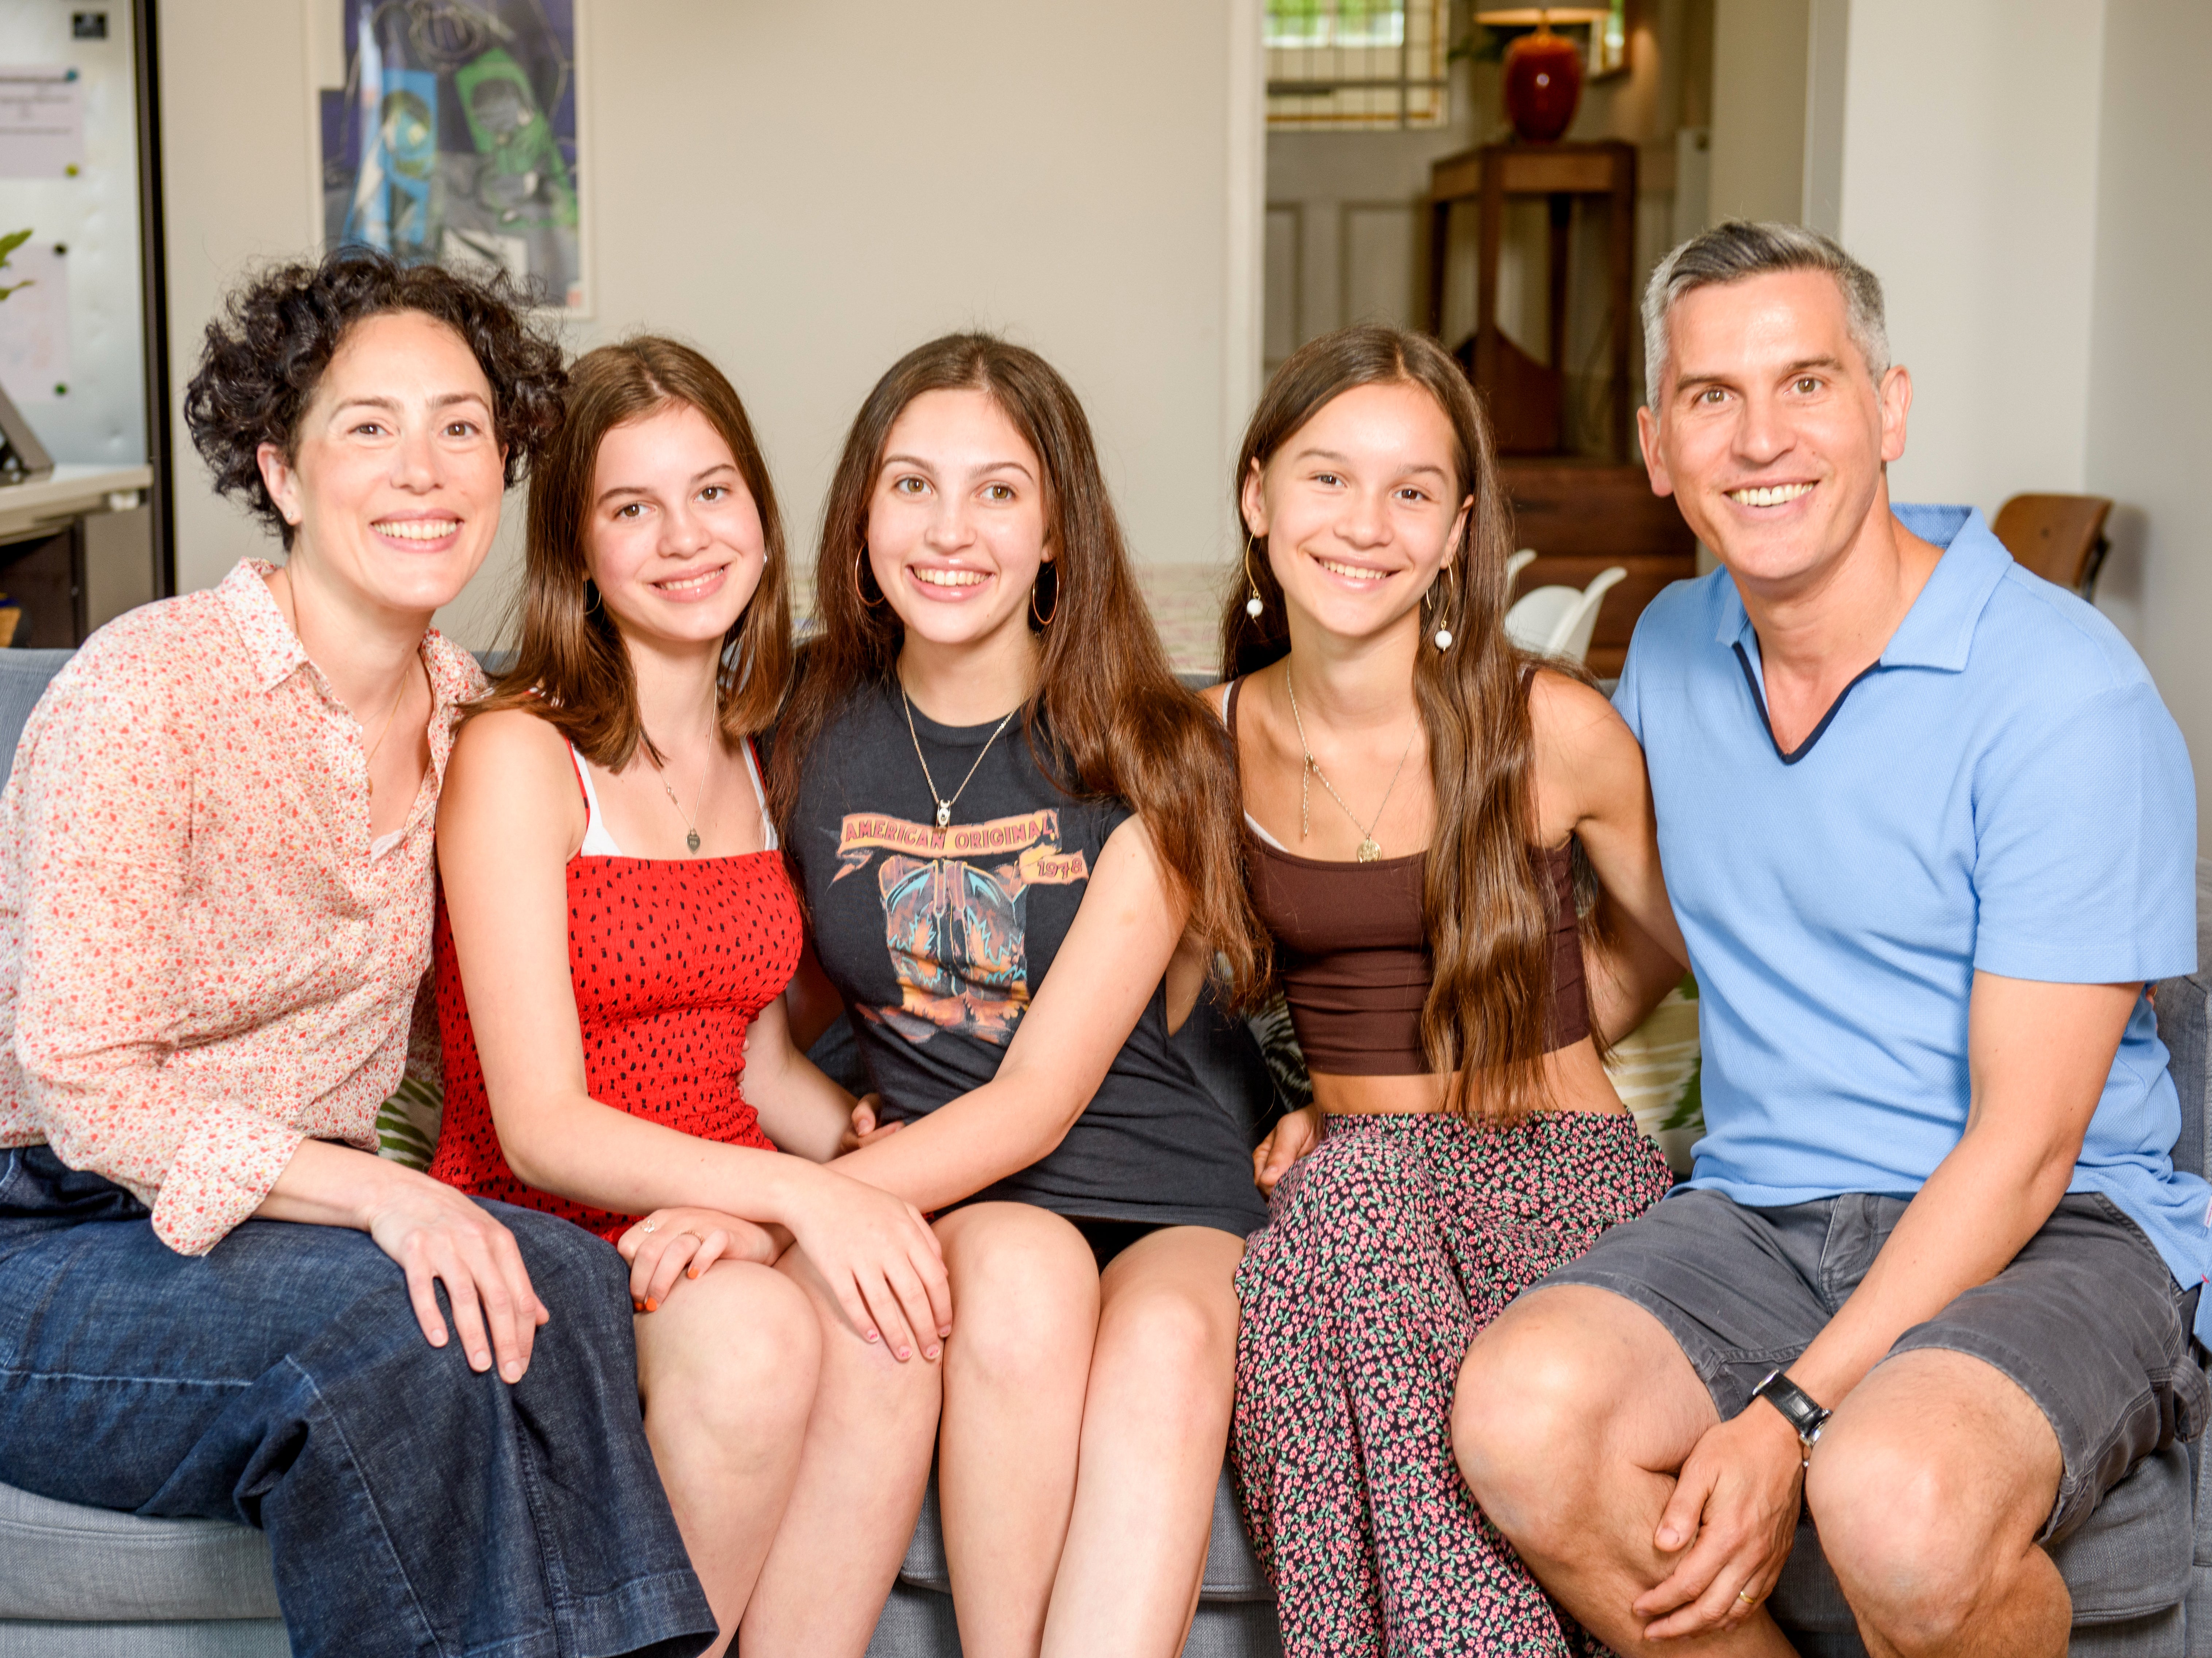 Beyond Equality volunteer John Davis with his wife and three daughters